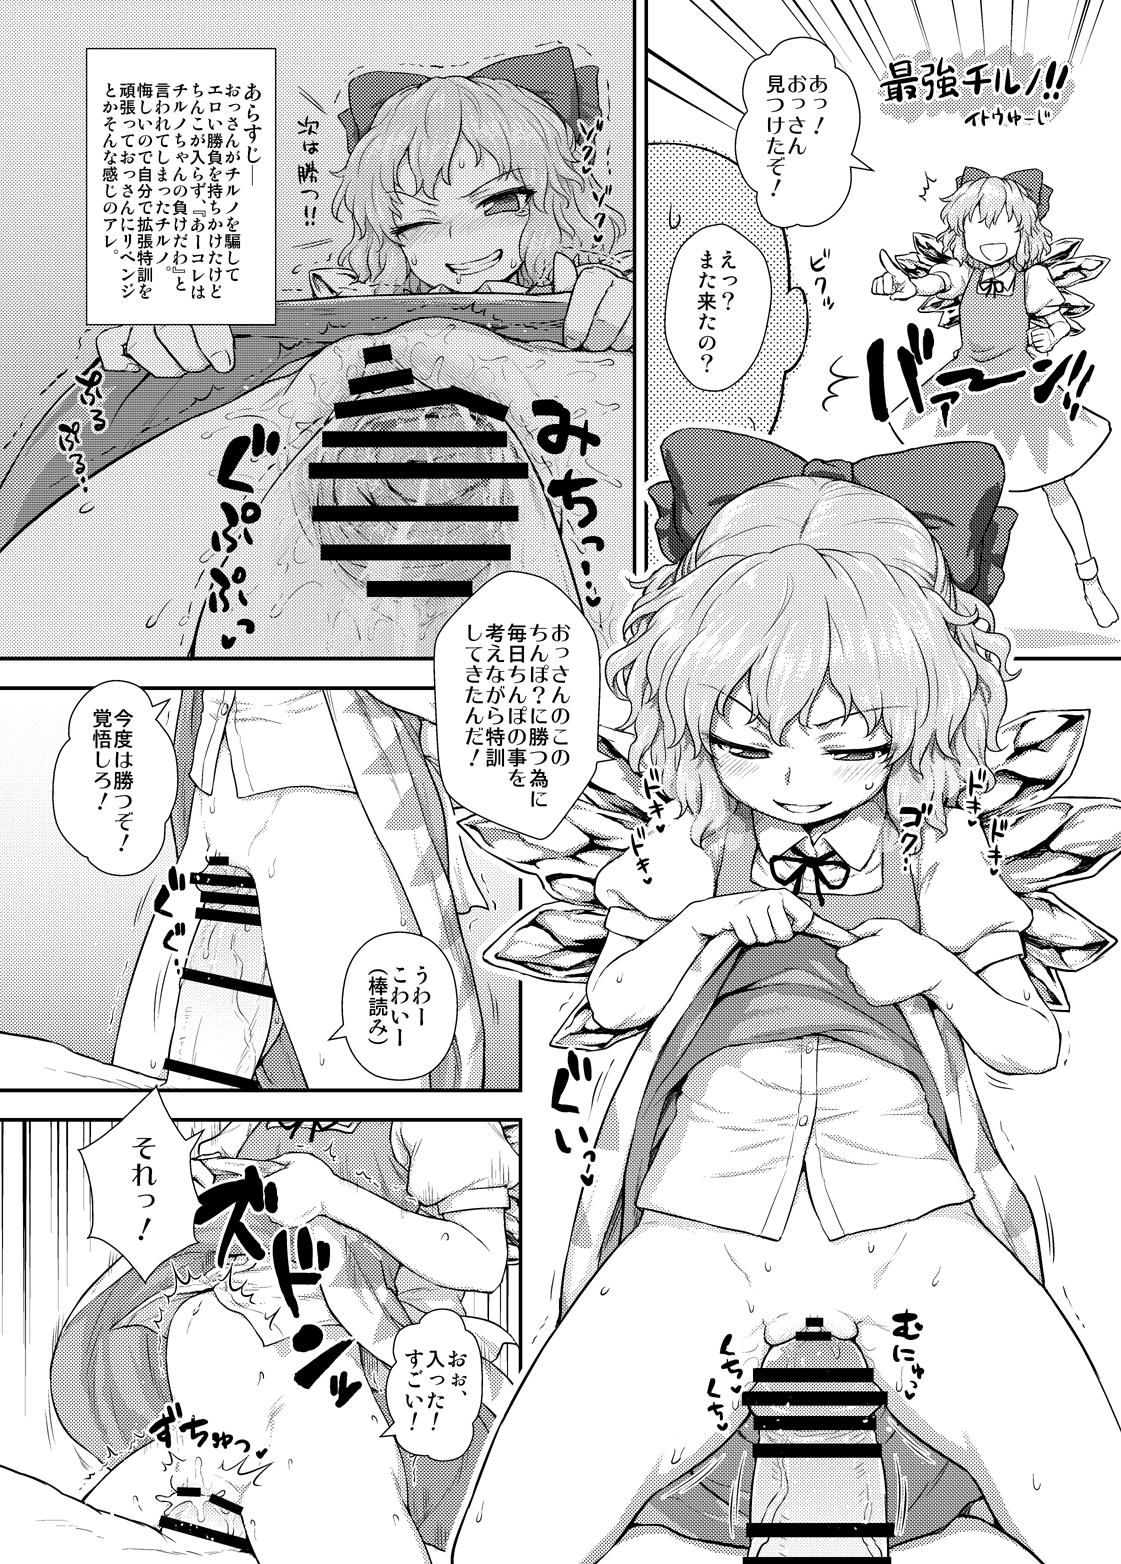 Culo 『東方子宮脱合同誌』 - Touhou project Trimmed - Page 1